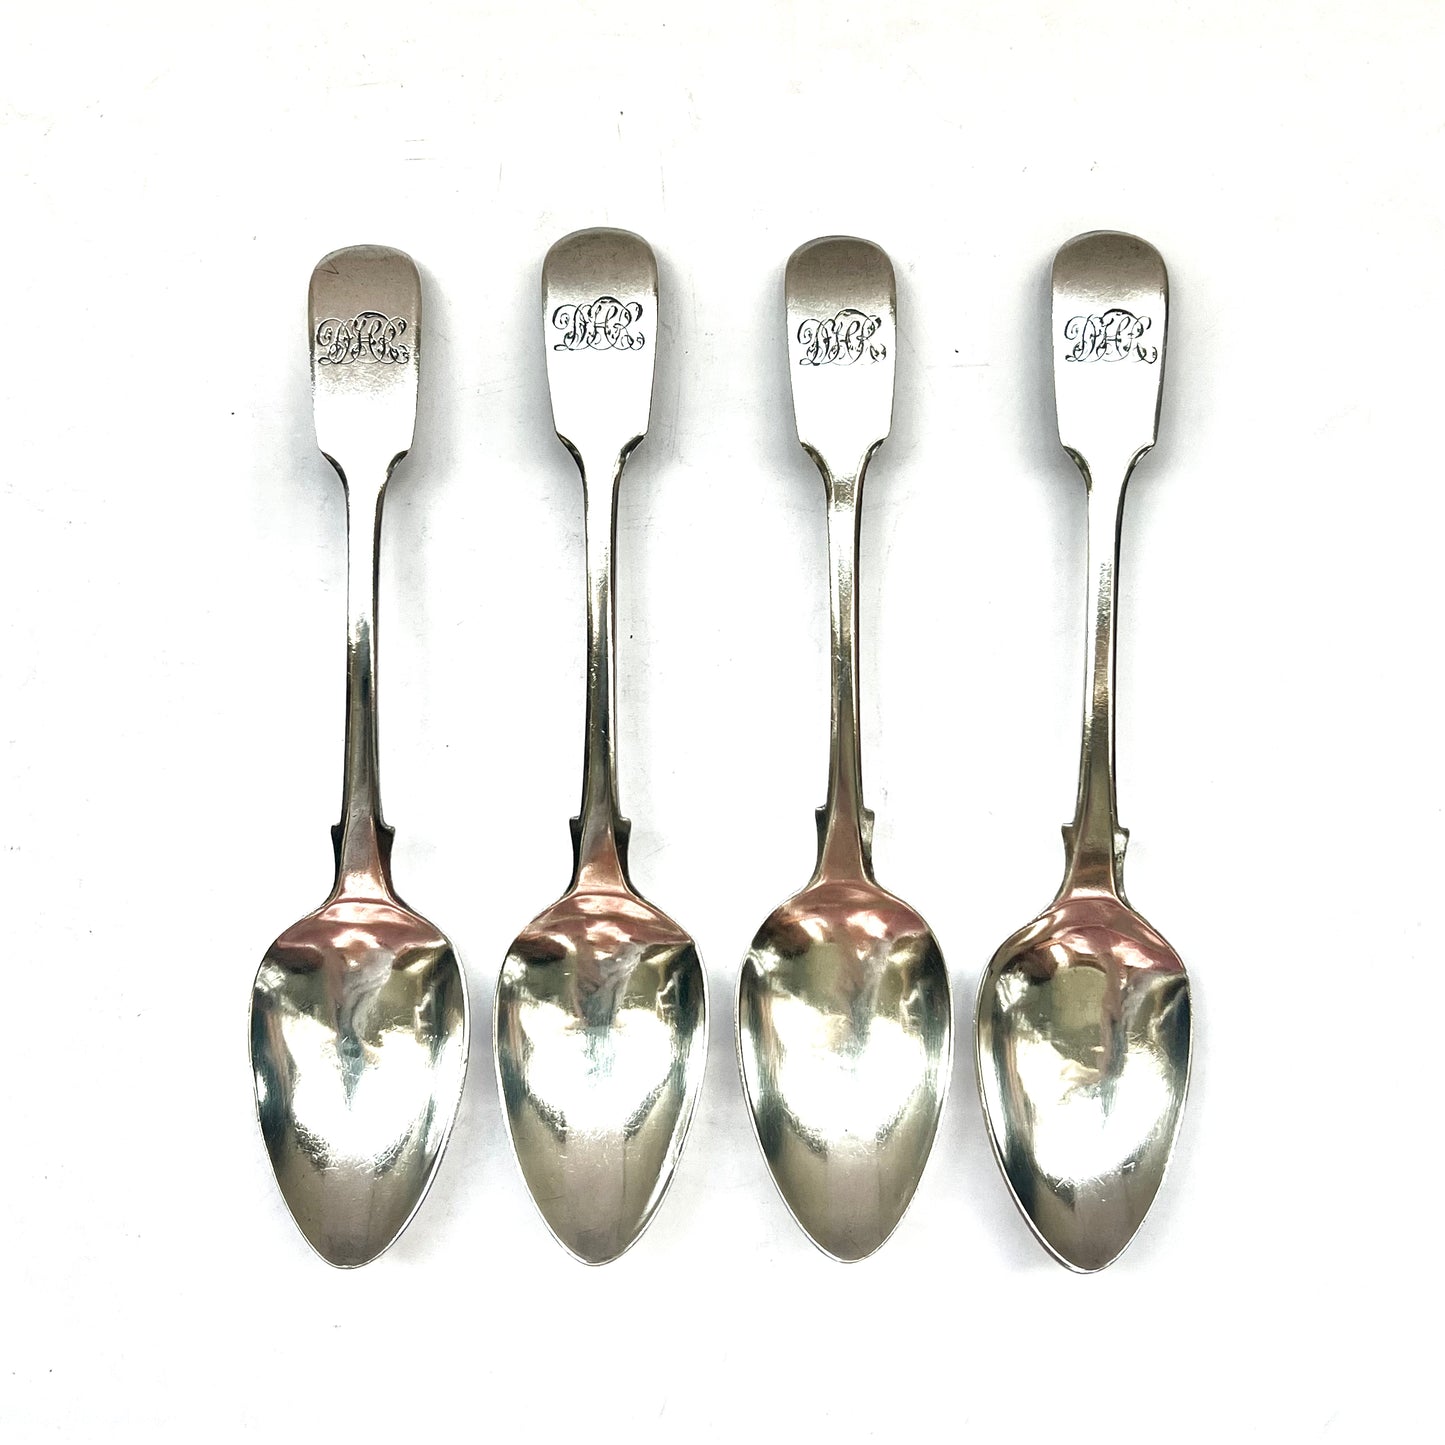 4 George III sterling silver spoons with marks for Sarah & John William Blake, London, 1818